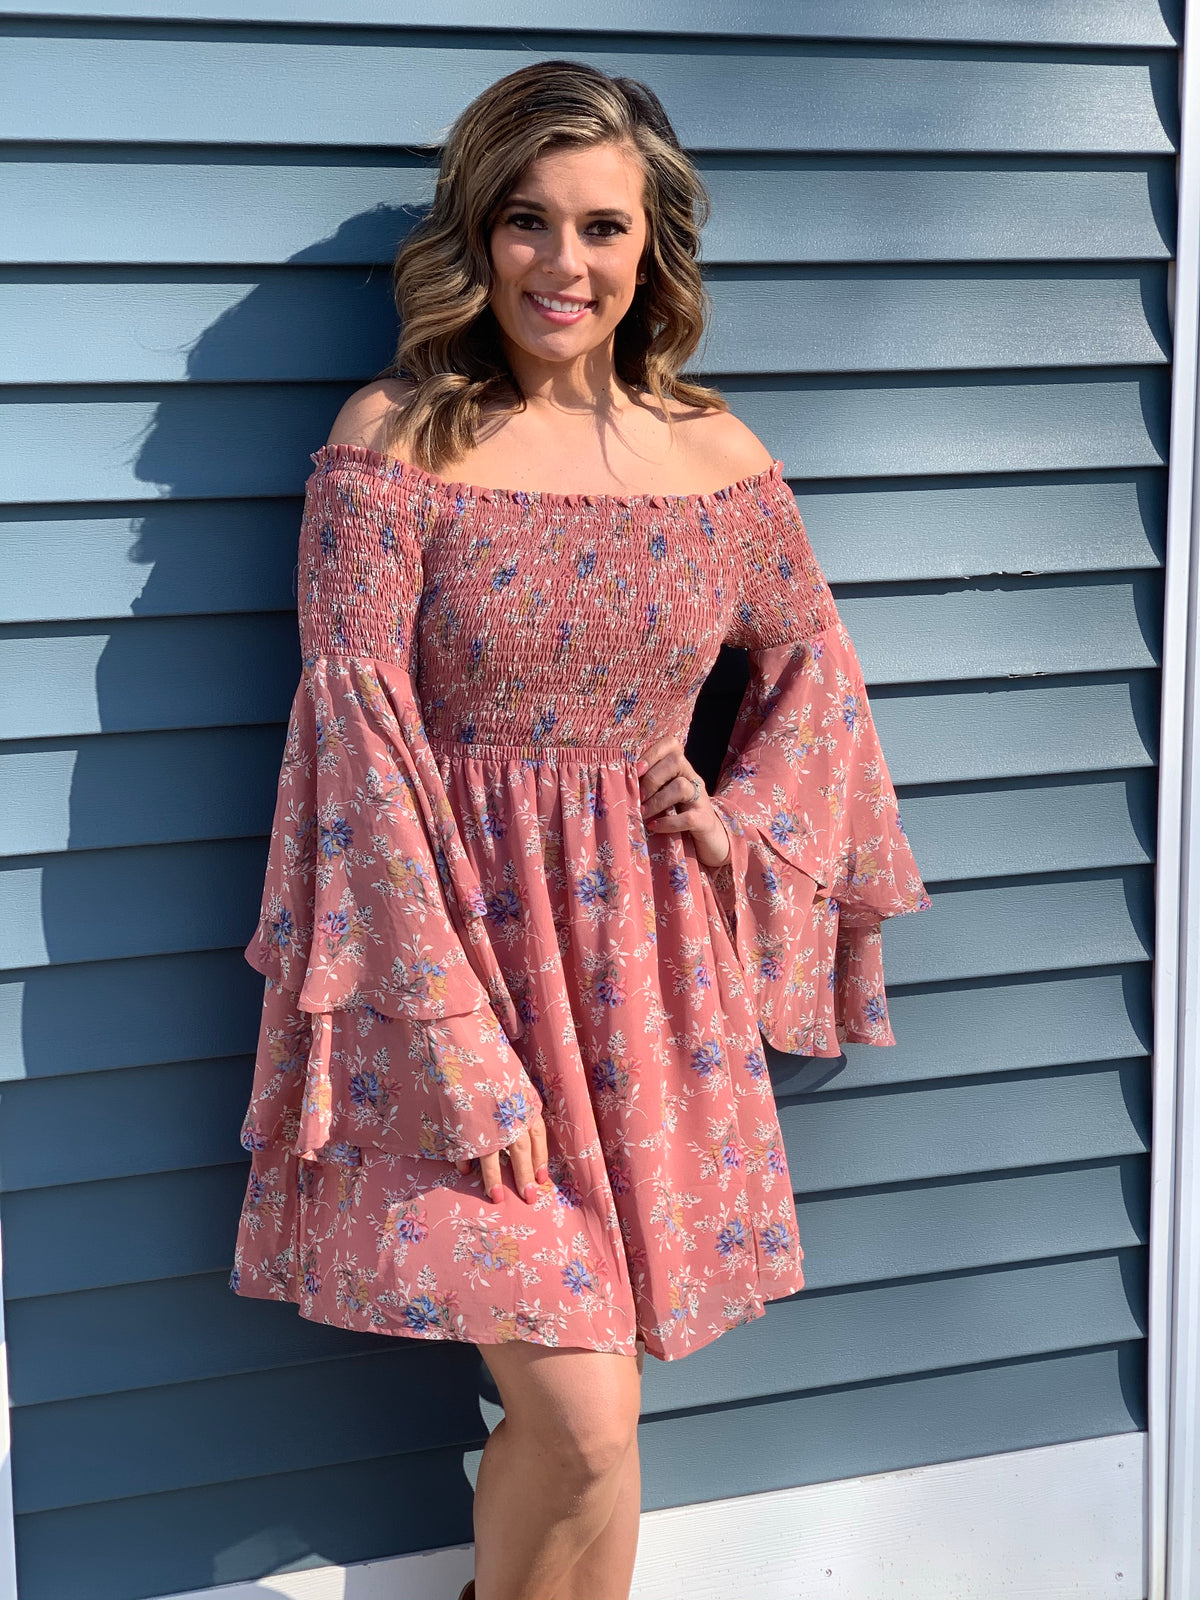 MAUVE FLORAL DRESS W/ SMOCKED TOP AND RUFFLE SLEEVES